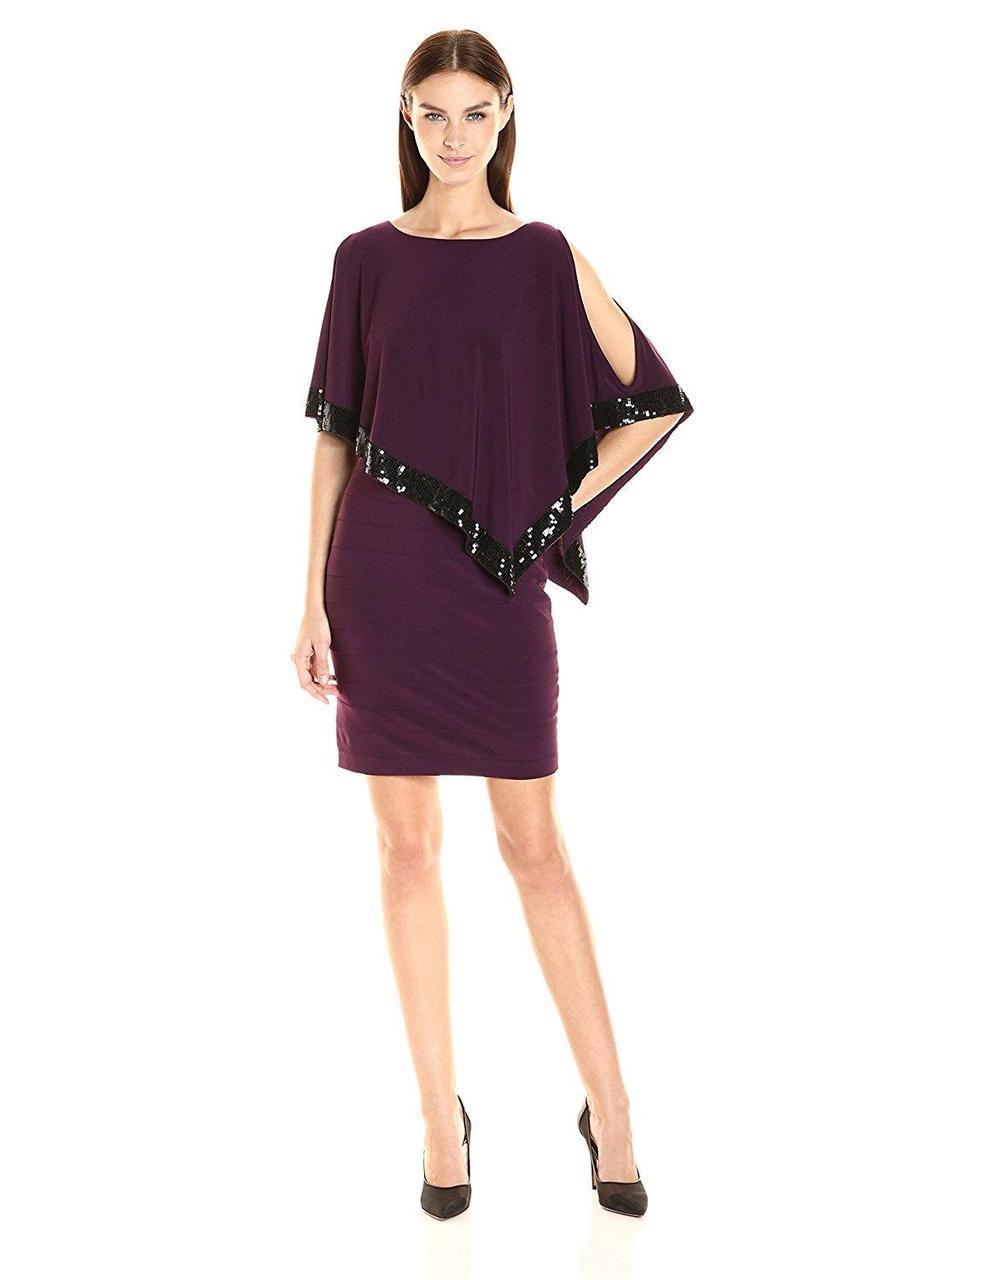 Adrianna Papell - AP1D100418 Sequin Trim Capelet Banded Sheath Dress in Purple